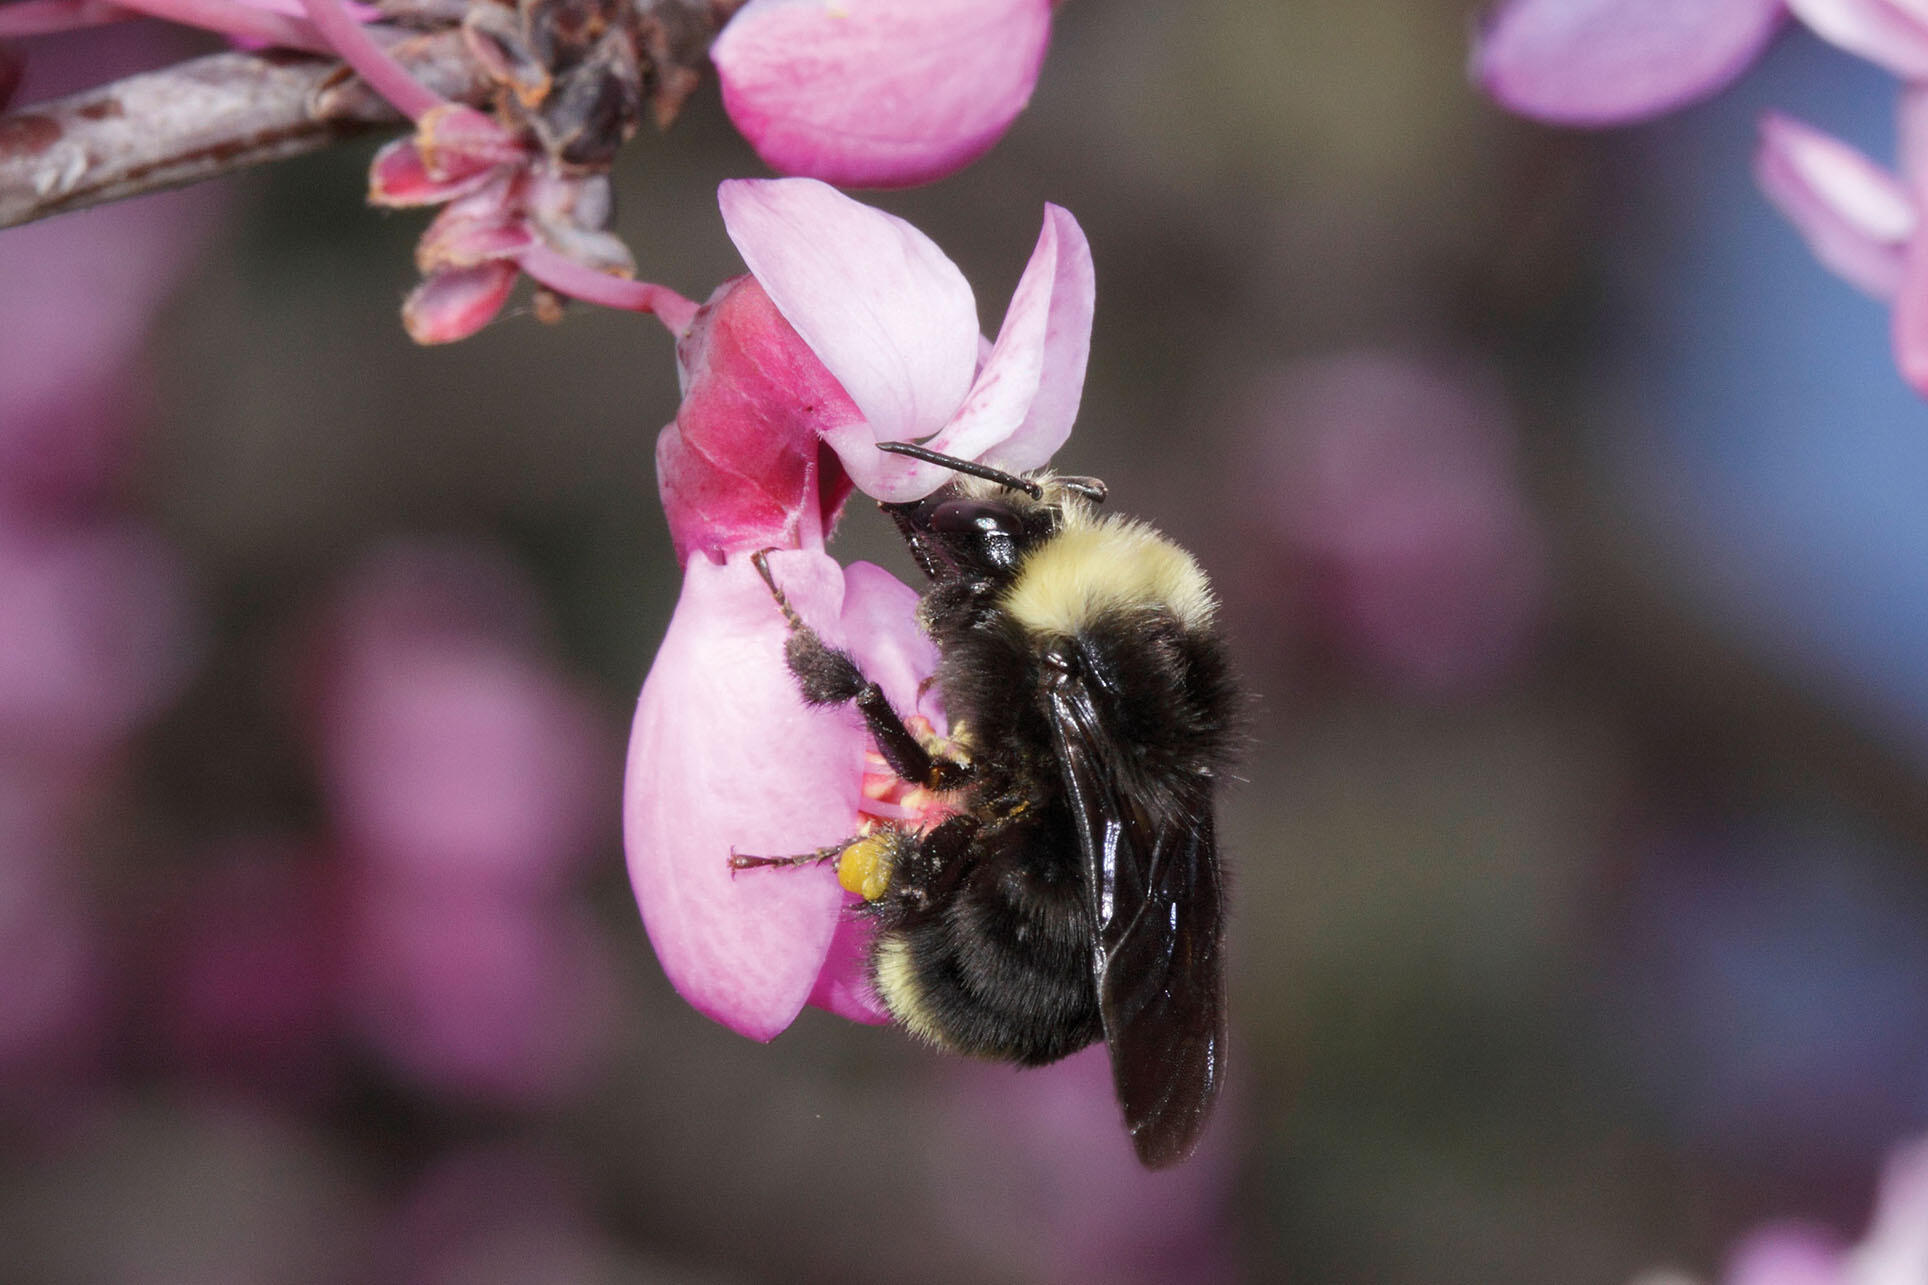 A yellow-faced bumble bee on a pink blossom. (Photo by Rollin Coville.)